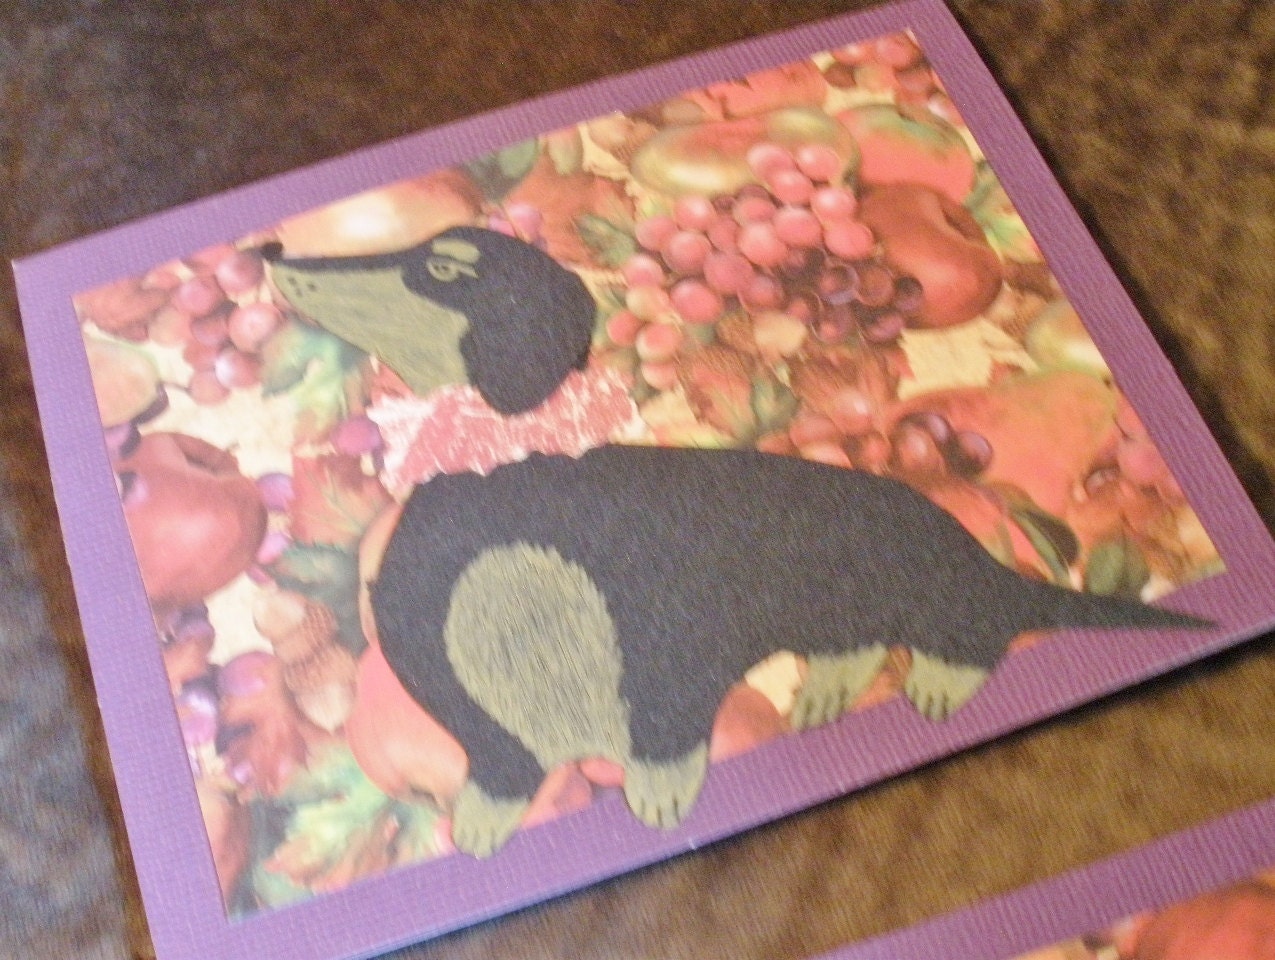 Autumn Harvest Fruit Dachshund Purple Collage Card Set Of 2 Cards With Envelopes - SassySashadoxie